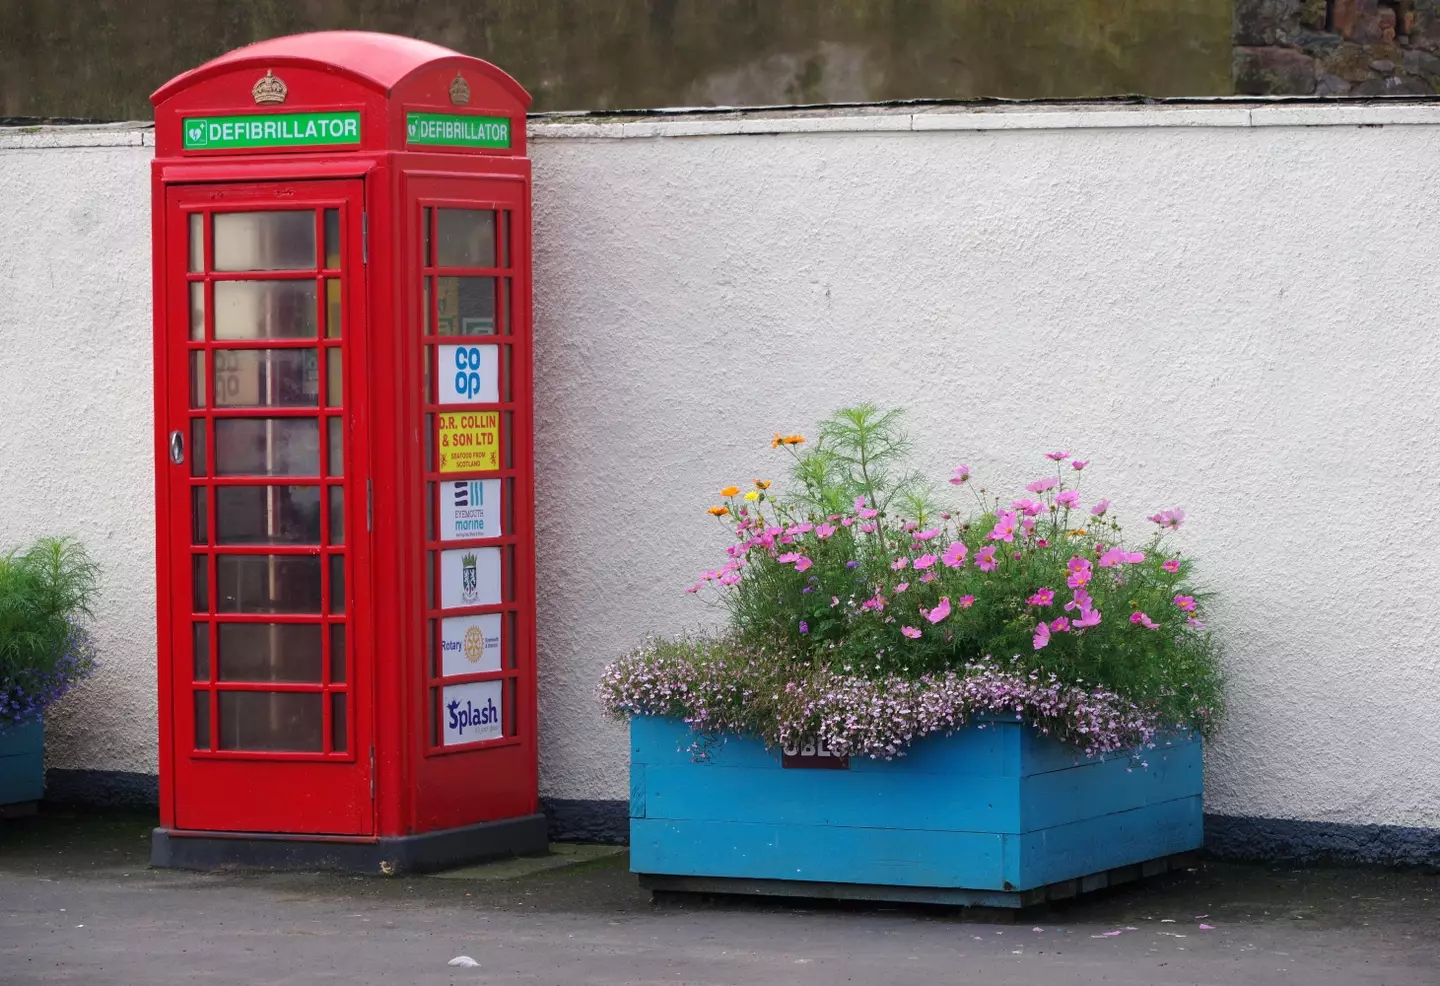 Some disused traditional red phone boxes are being used as defibrillator stations in the UK.